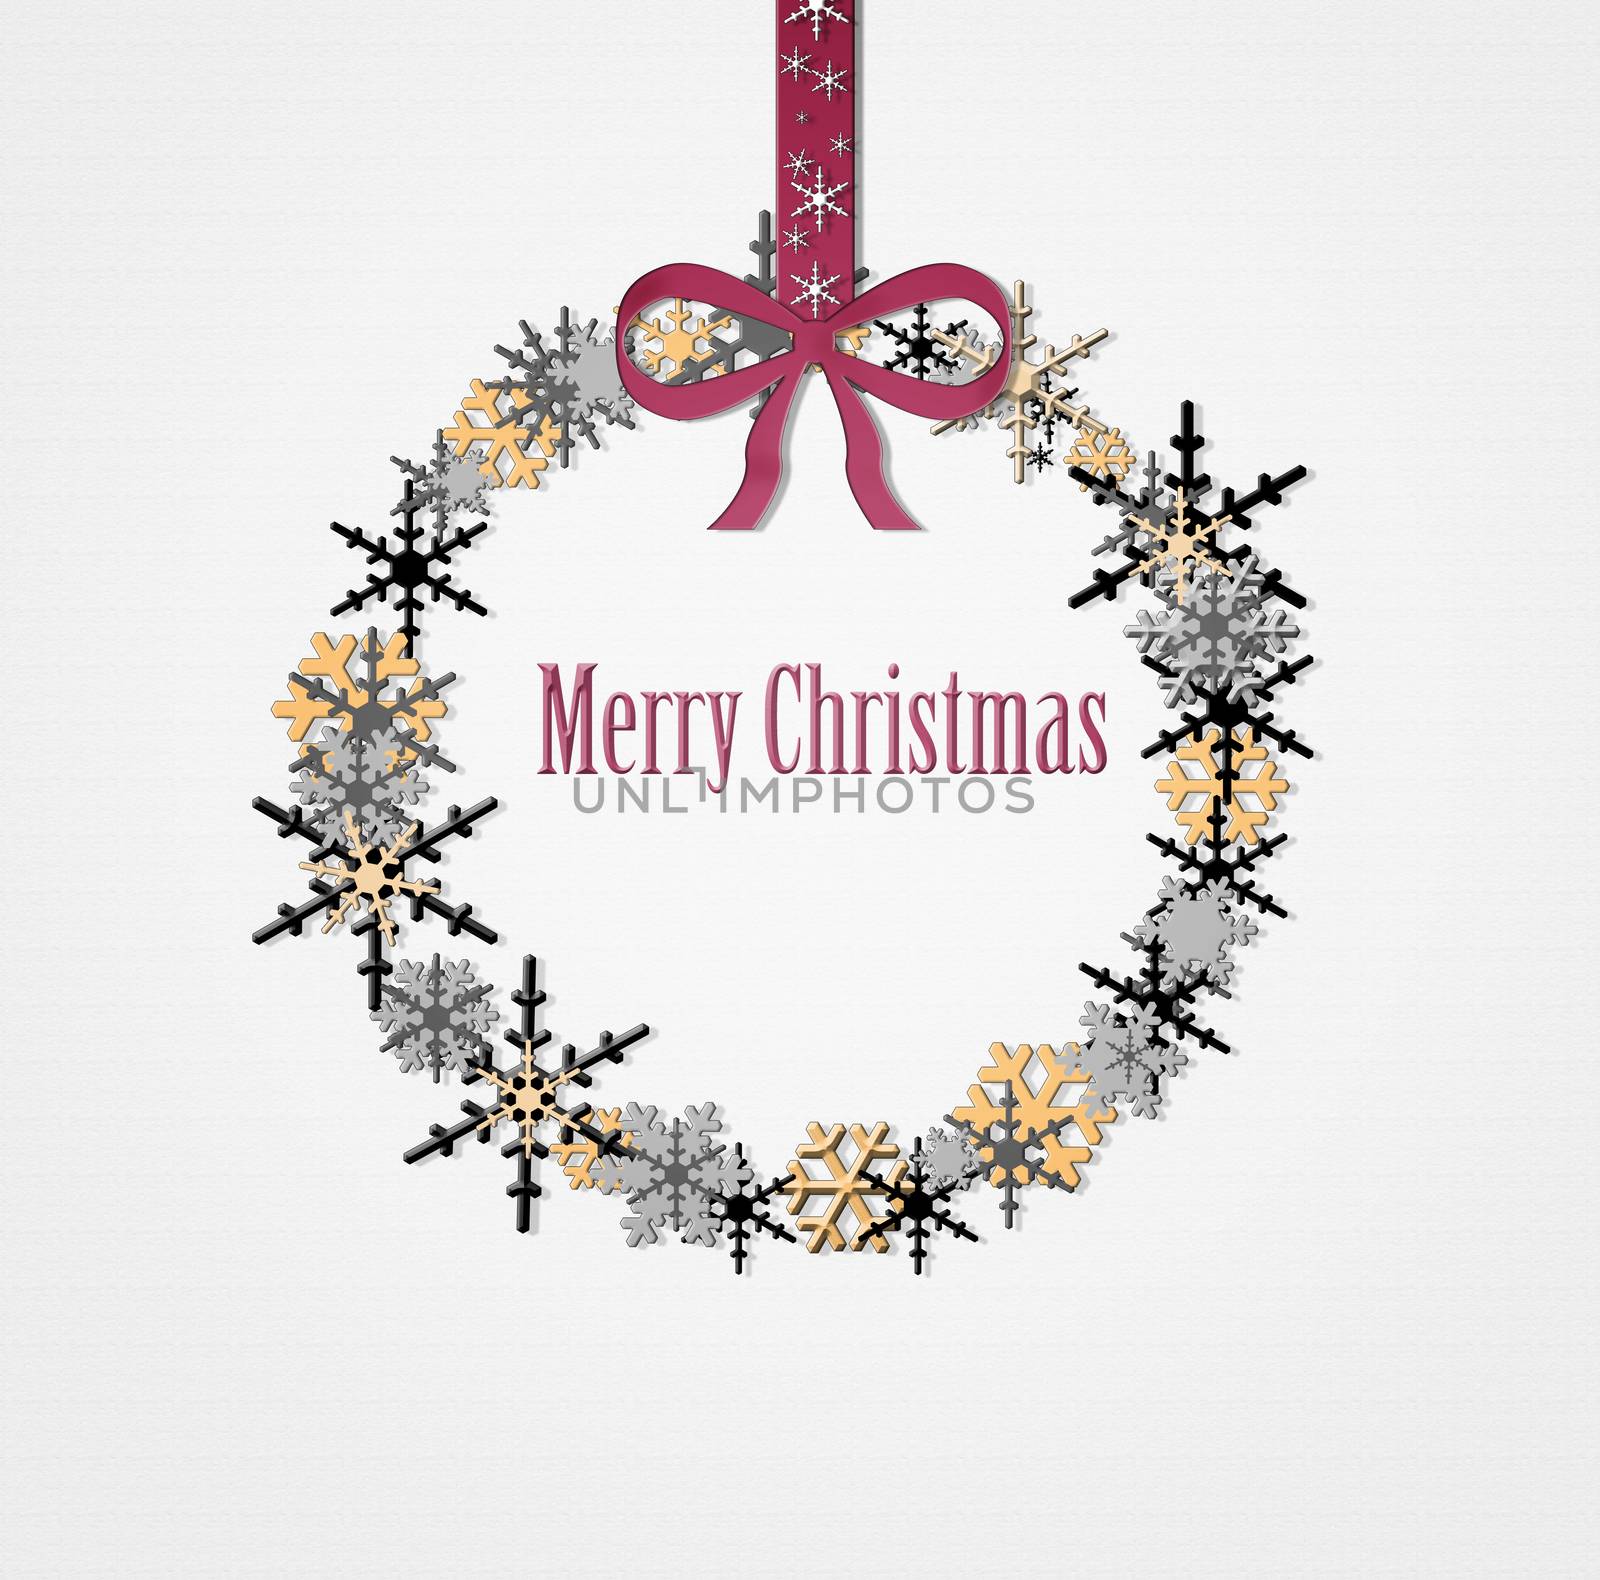 Merry Christmas lettering with golden, black and silver snowflakes in wreath shape. Merry Christmas luxury greeting card. Illustration